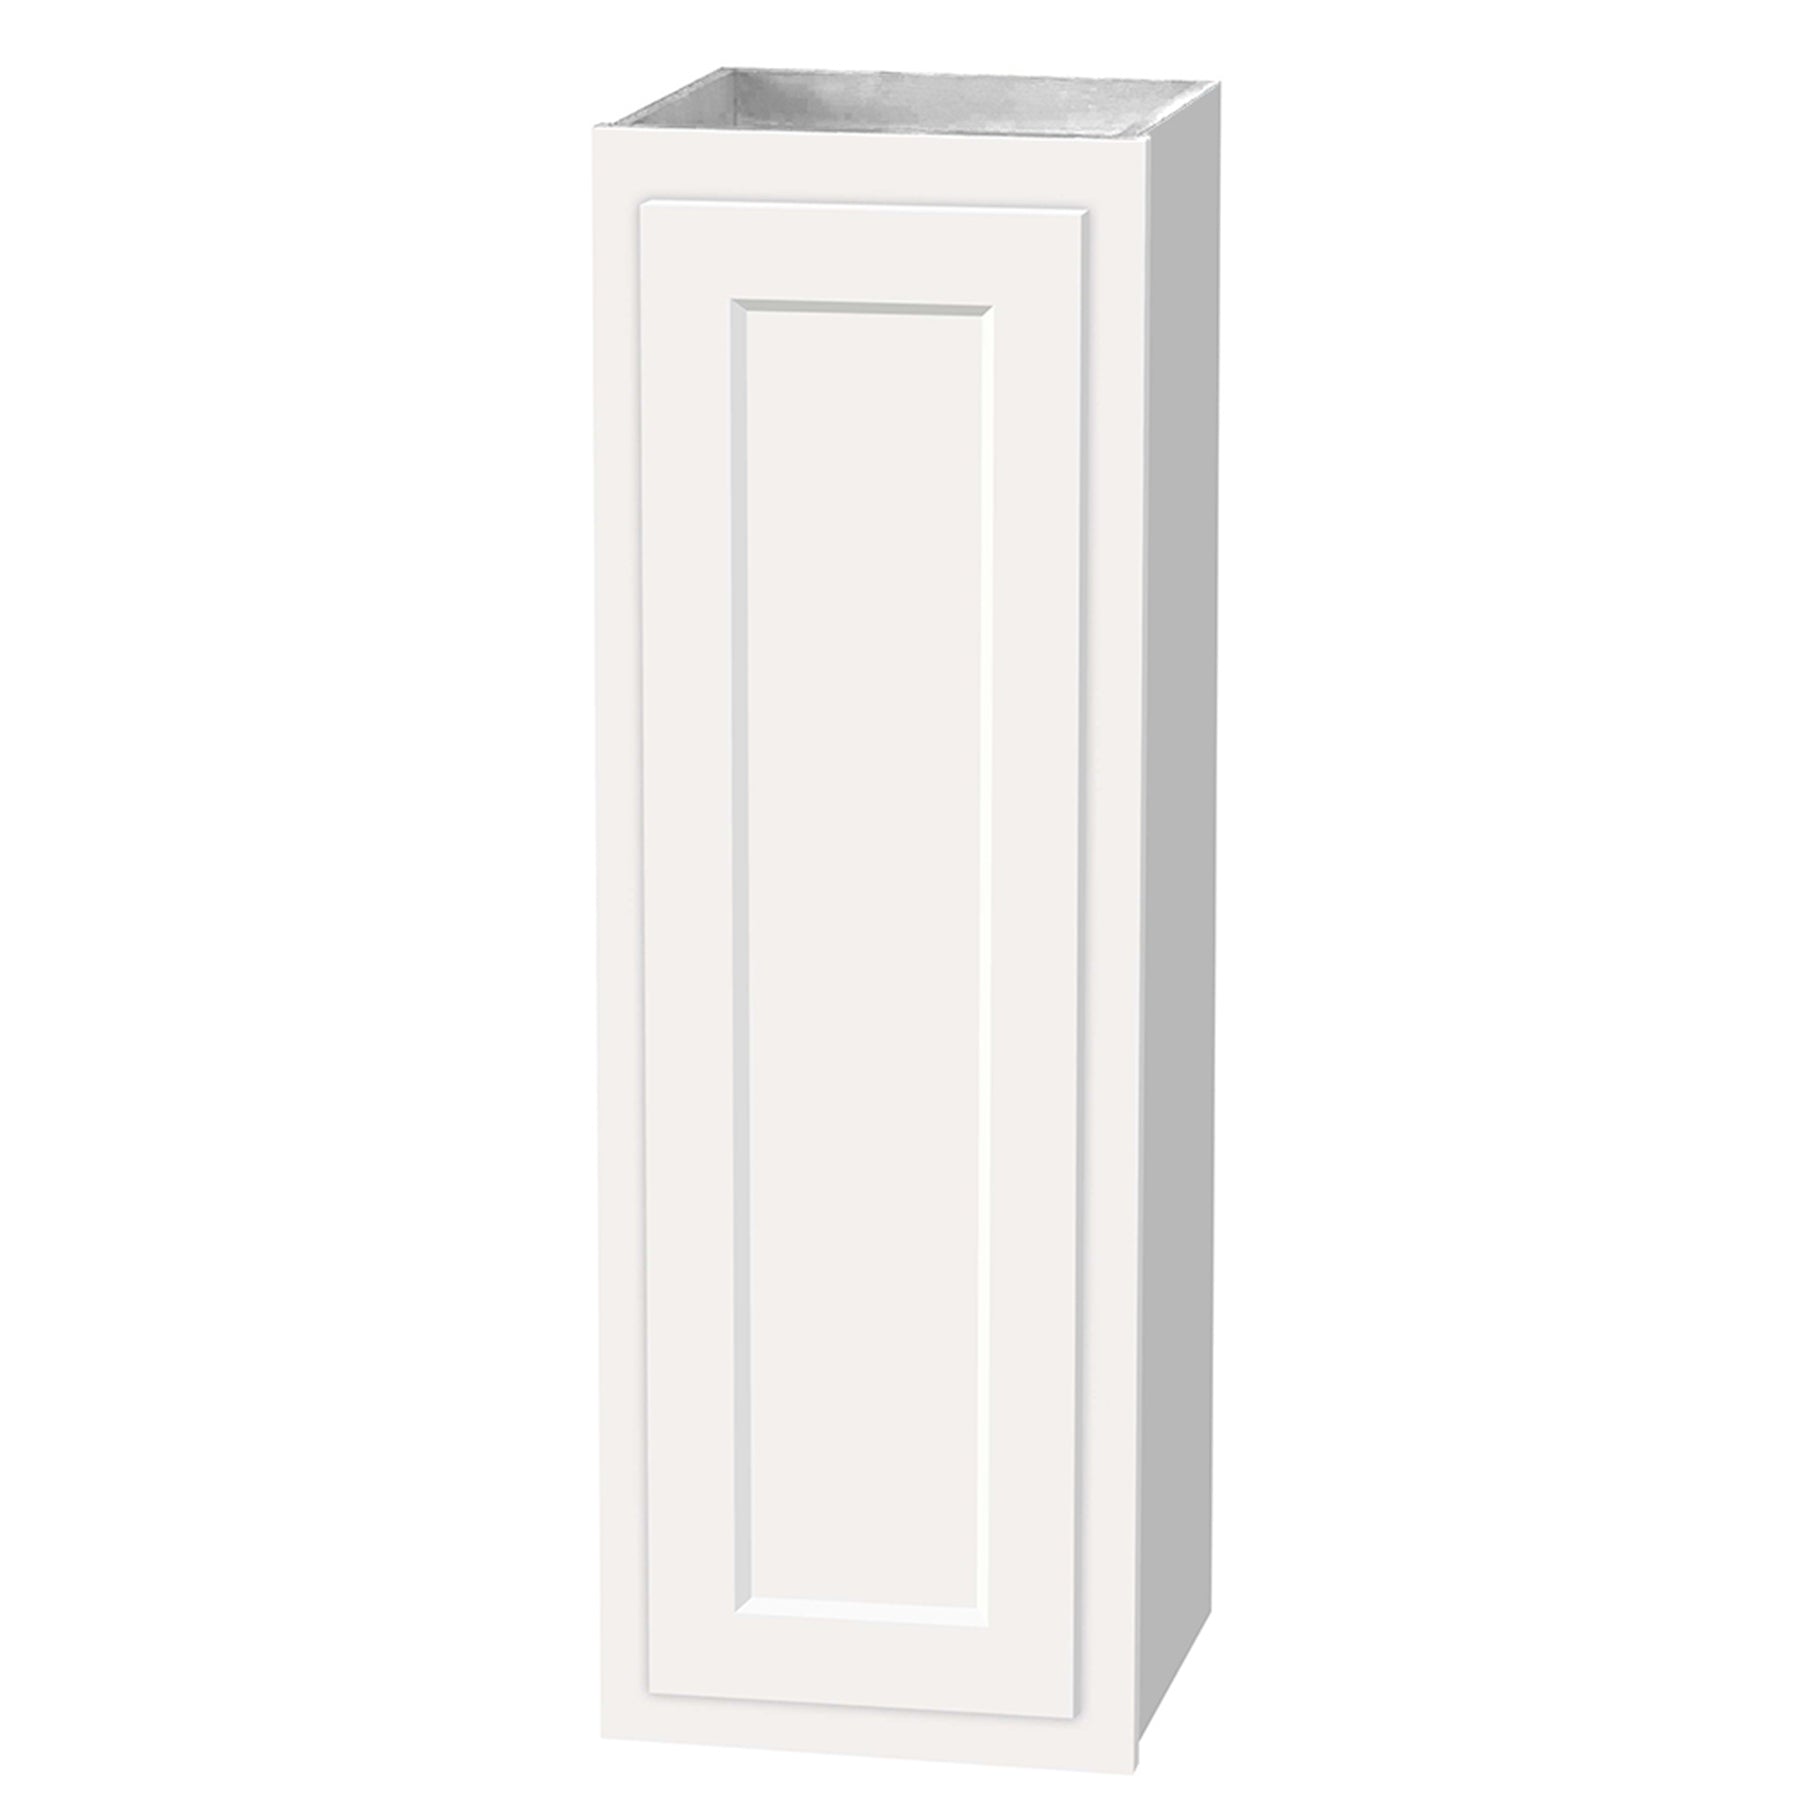 36 inch Wall Cabinets - Dwhite Shaker - 12 Inch W x 36 Inch H x 12 Inch D